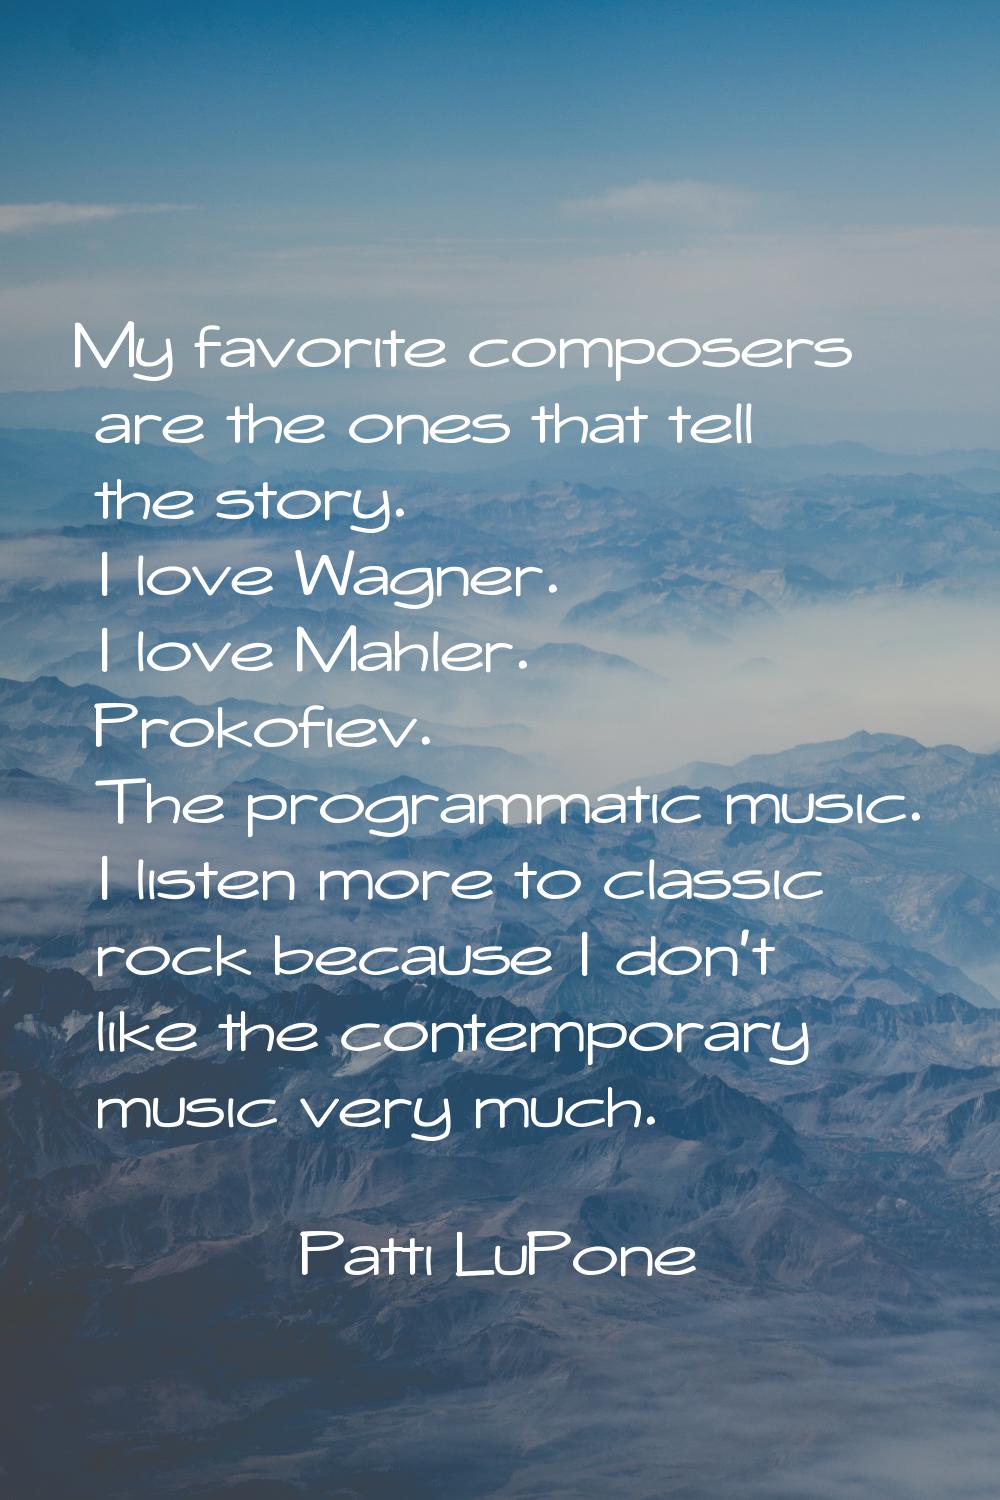 My favorite composers are the ones that tell the story. I love Wagner. I love Mahler. Prokofiev. Th